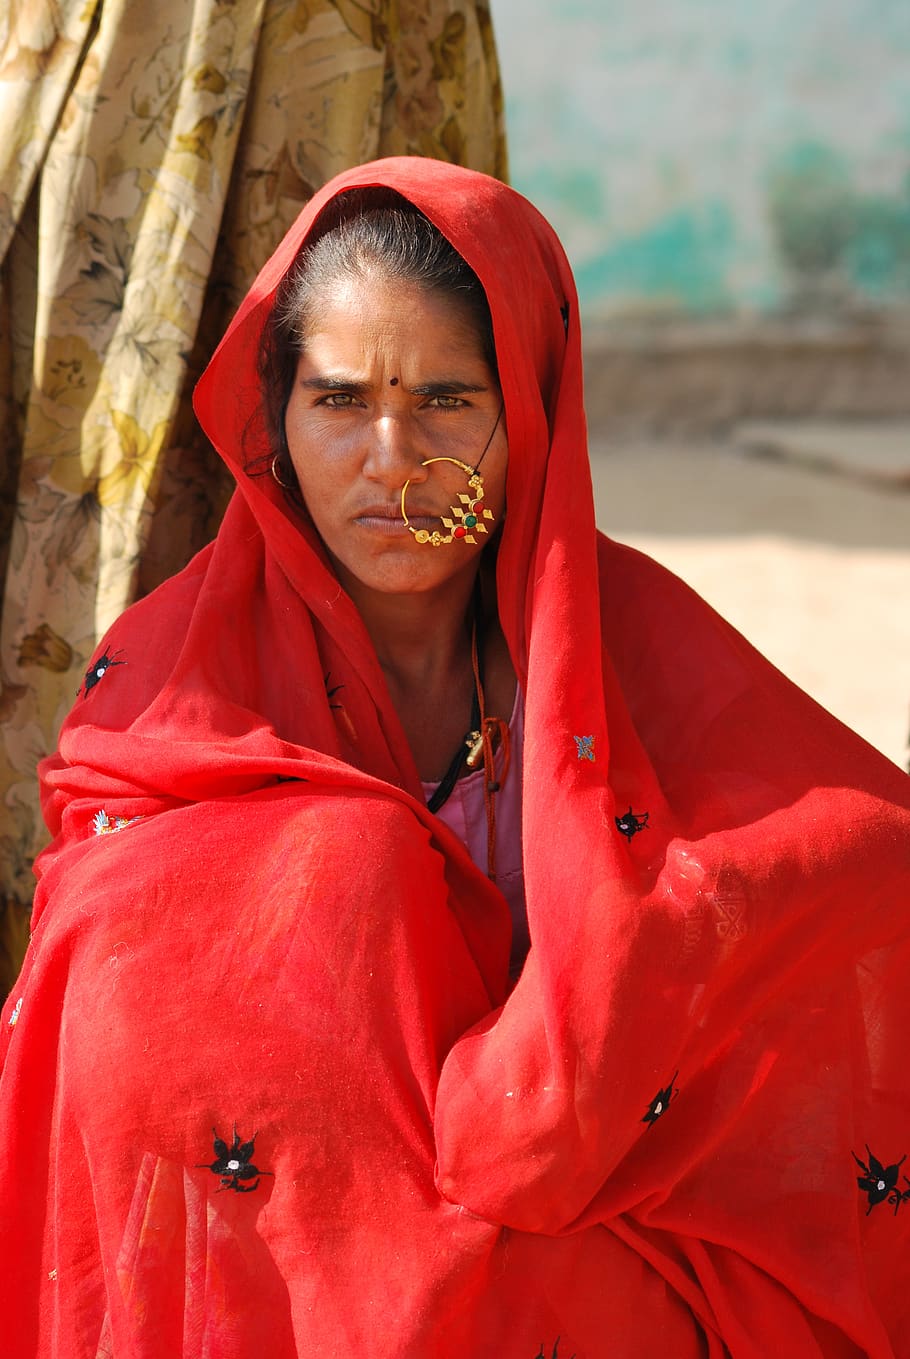 woman, village, red clothing, cultural, countryside, india, pensive, jewelry, one person, real people